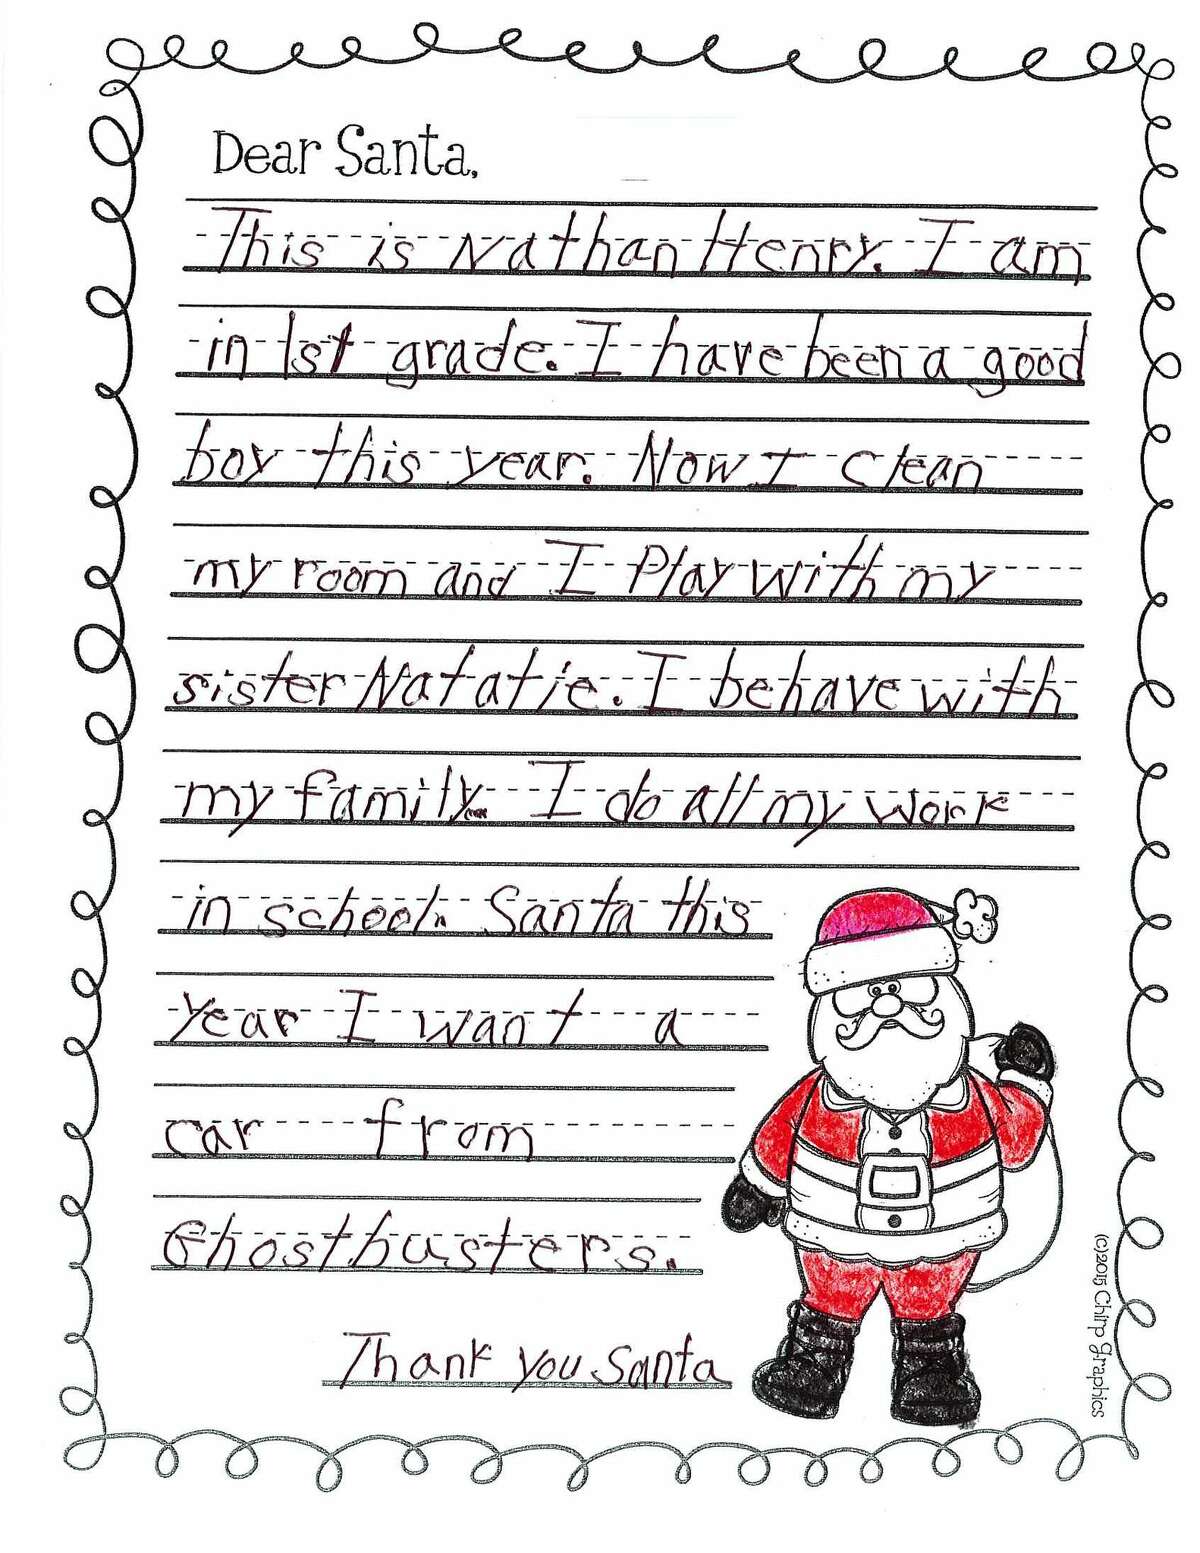 LETTERS TO SANTA: Houston Schools, Chickasaw Journal